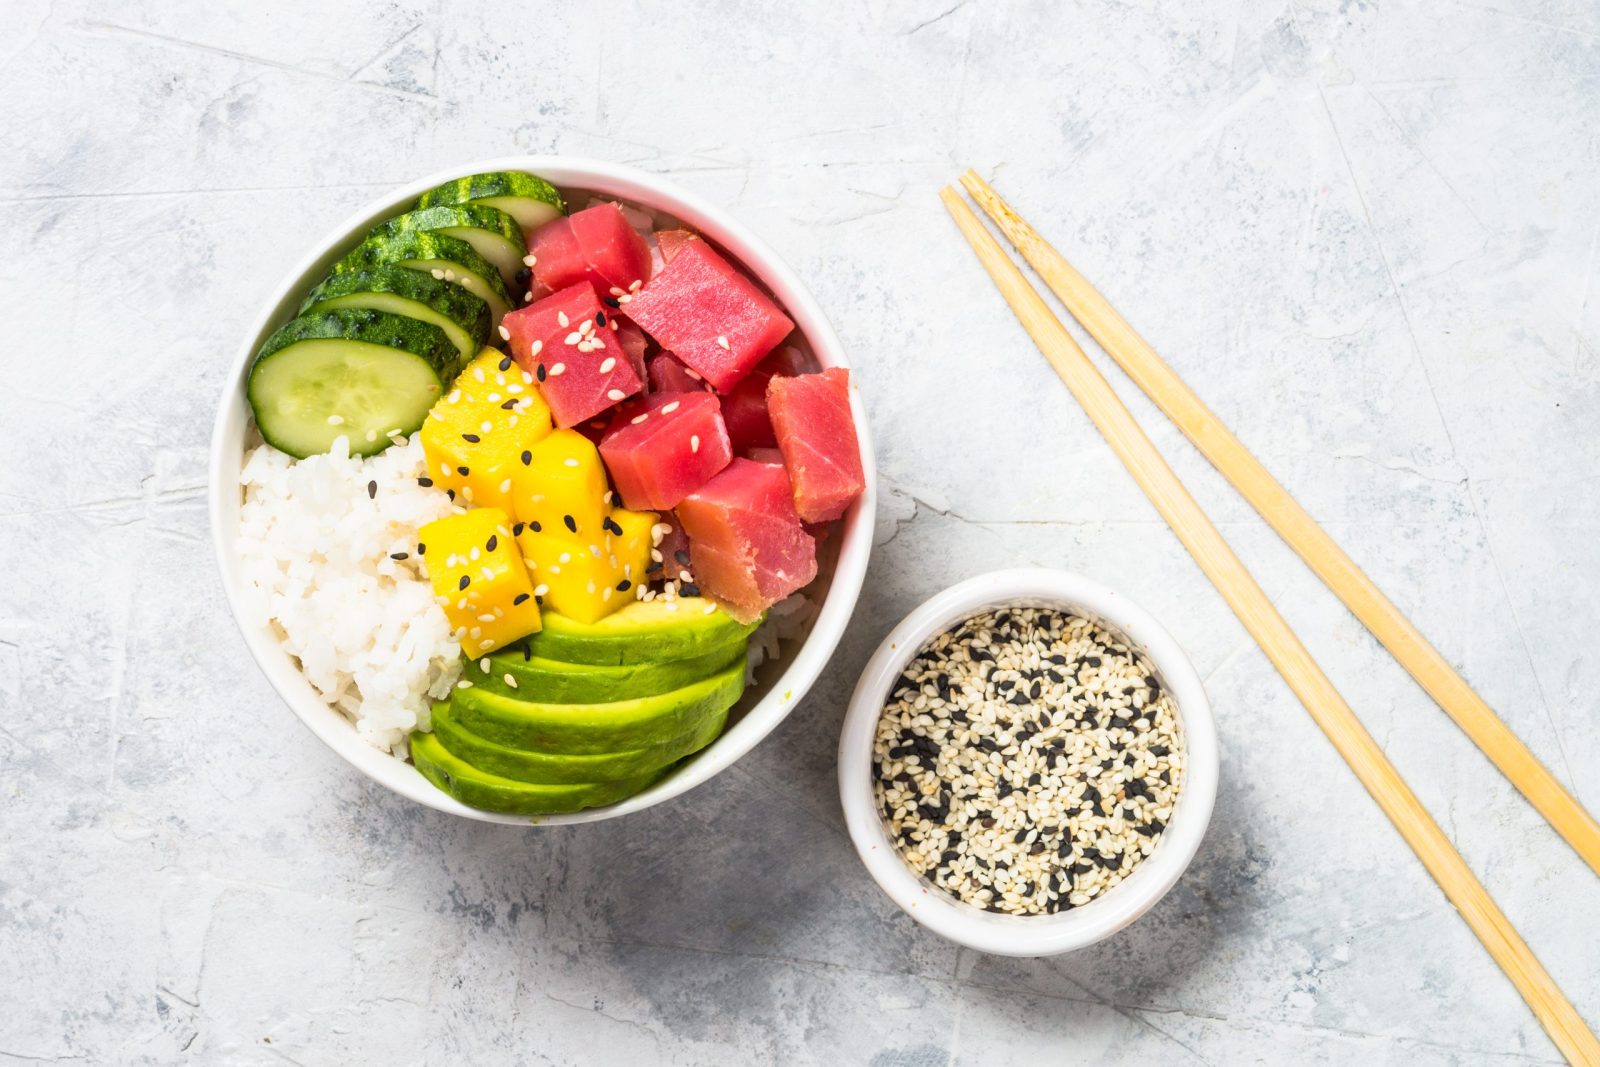 Poke bowl with seeds on side